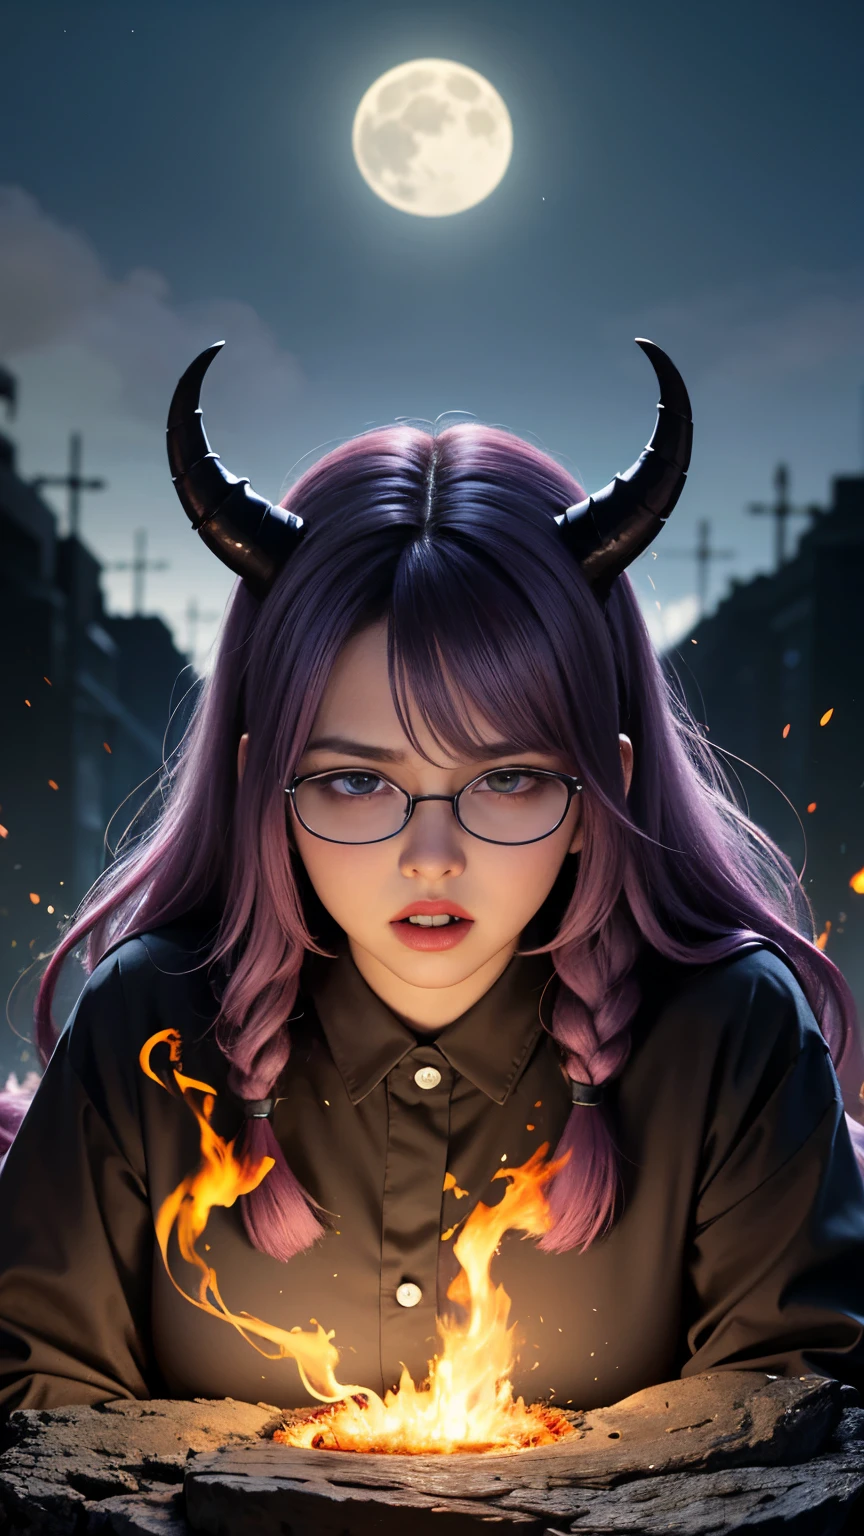 background（Black Night Sky，Big Moon），Close-up of a woman，Wearing a white shirt、Purple Hair，Very long hair，very thick braids，Purple eyes，big 、((((Glasses))))、realistic girl rendering, 8K artistic german bokeh, Enchanting girl, Realistic girl, Gurwitz, Gurwitz-style artwork, Girl Roleplay, Realistic 3D style, cgstation Popular Topics,, 8K Portrait Rendering,（truth，truth：1.4），Wear pink pajamas，巨big ，Sparkling eyes，Purple eyes、(highest quality,4K,8K,High resolution,masterpiece:1.2),Very detailed,(Realistic,photoRealistic,photo-Realistic:1.37),Mythical monster,Beast-like creature,muscular,Six big legs,Stand like a gorilla,Red fur covering the body,two big horns,Drill teeth,Sharp Claws,Huge shape,Burning Fire Magic,Energy aura,A threatening presence,Glowing Eyes,Intimidating posture,dark environment,Smoke-filled air,Ominous Shadow,Majestic and fierce,Explosive power,Vibrant colors,bold,Horror art style,mobile composition,Dramatic lighting,Rib Layer,large sharp teeth,Sharp Edges,Very detailedスケール,Burning Crack,Burning Flames,Furious look,Burning with anger,Surrounded by sparks and embers), Scared, dark, spooky, Underwater mist liquid swirl cavity, highest quality, Front view, Satanic, 18 year old asian girl、Liu Wen, Shaved eyebrows, With big black ram horn, , A large snake with slimy tentacles wrapped around its shoulders. Moody and dramatic lighting, that&#39;s it, storm, lightning, Smoke and Fog Environment, Fuzzy smoke background, Wide-angle shot, Wide-angle shot, elevation, Extreme angle shot, Vignette, Unrealistic Nightmare,